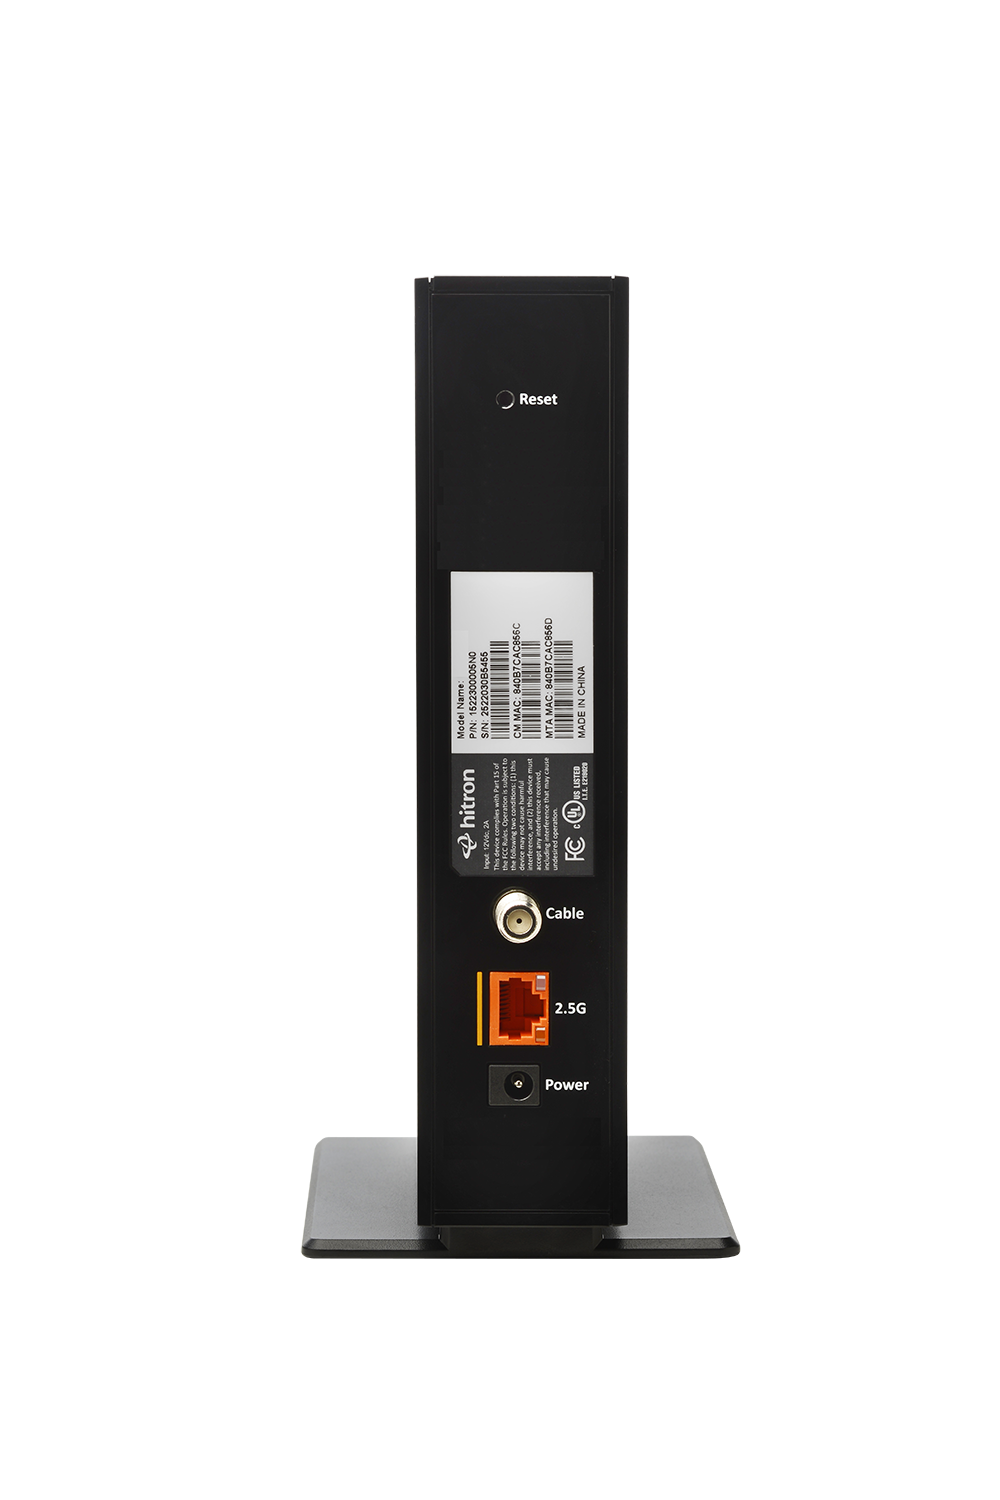 DOCSIS 3.1 Cable Modem from Hitron - CODA57